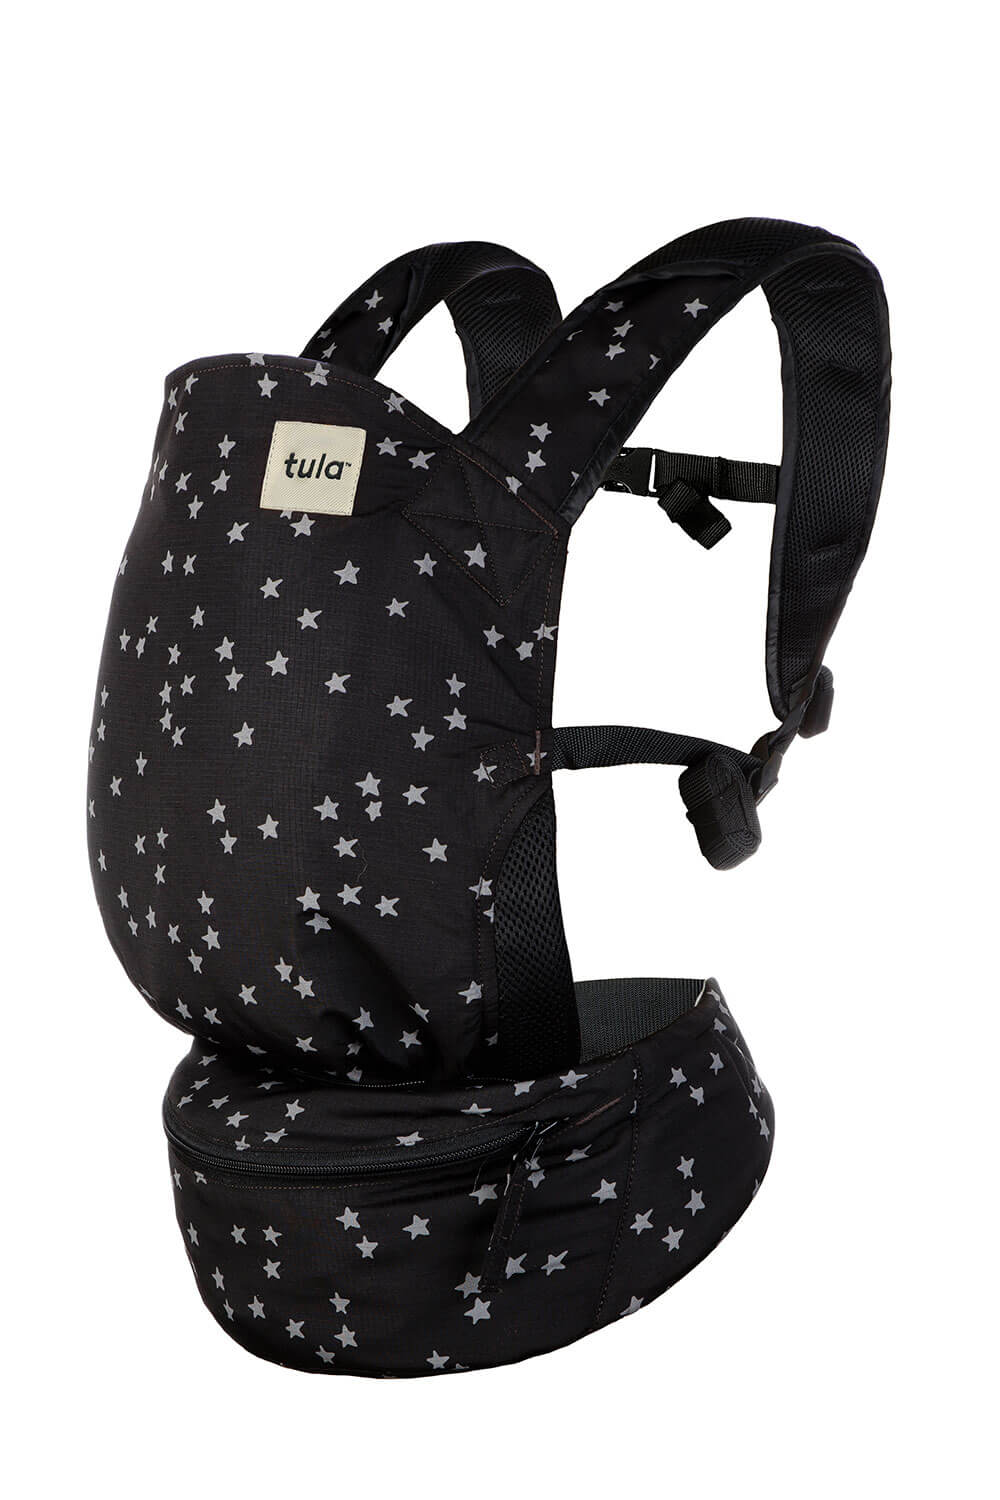 Everything You Need To Know About The New Tula Snaps - Fabric